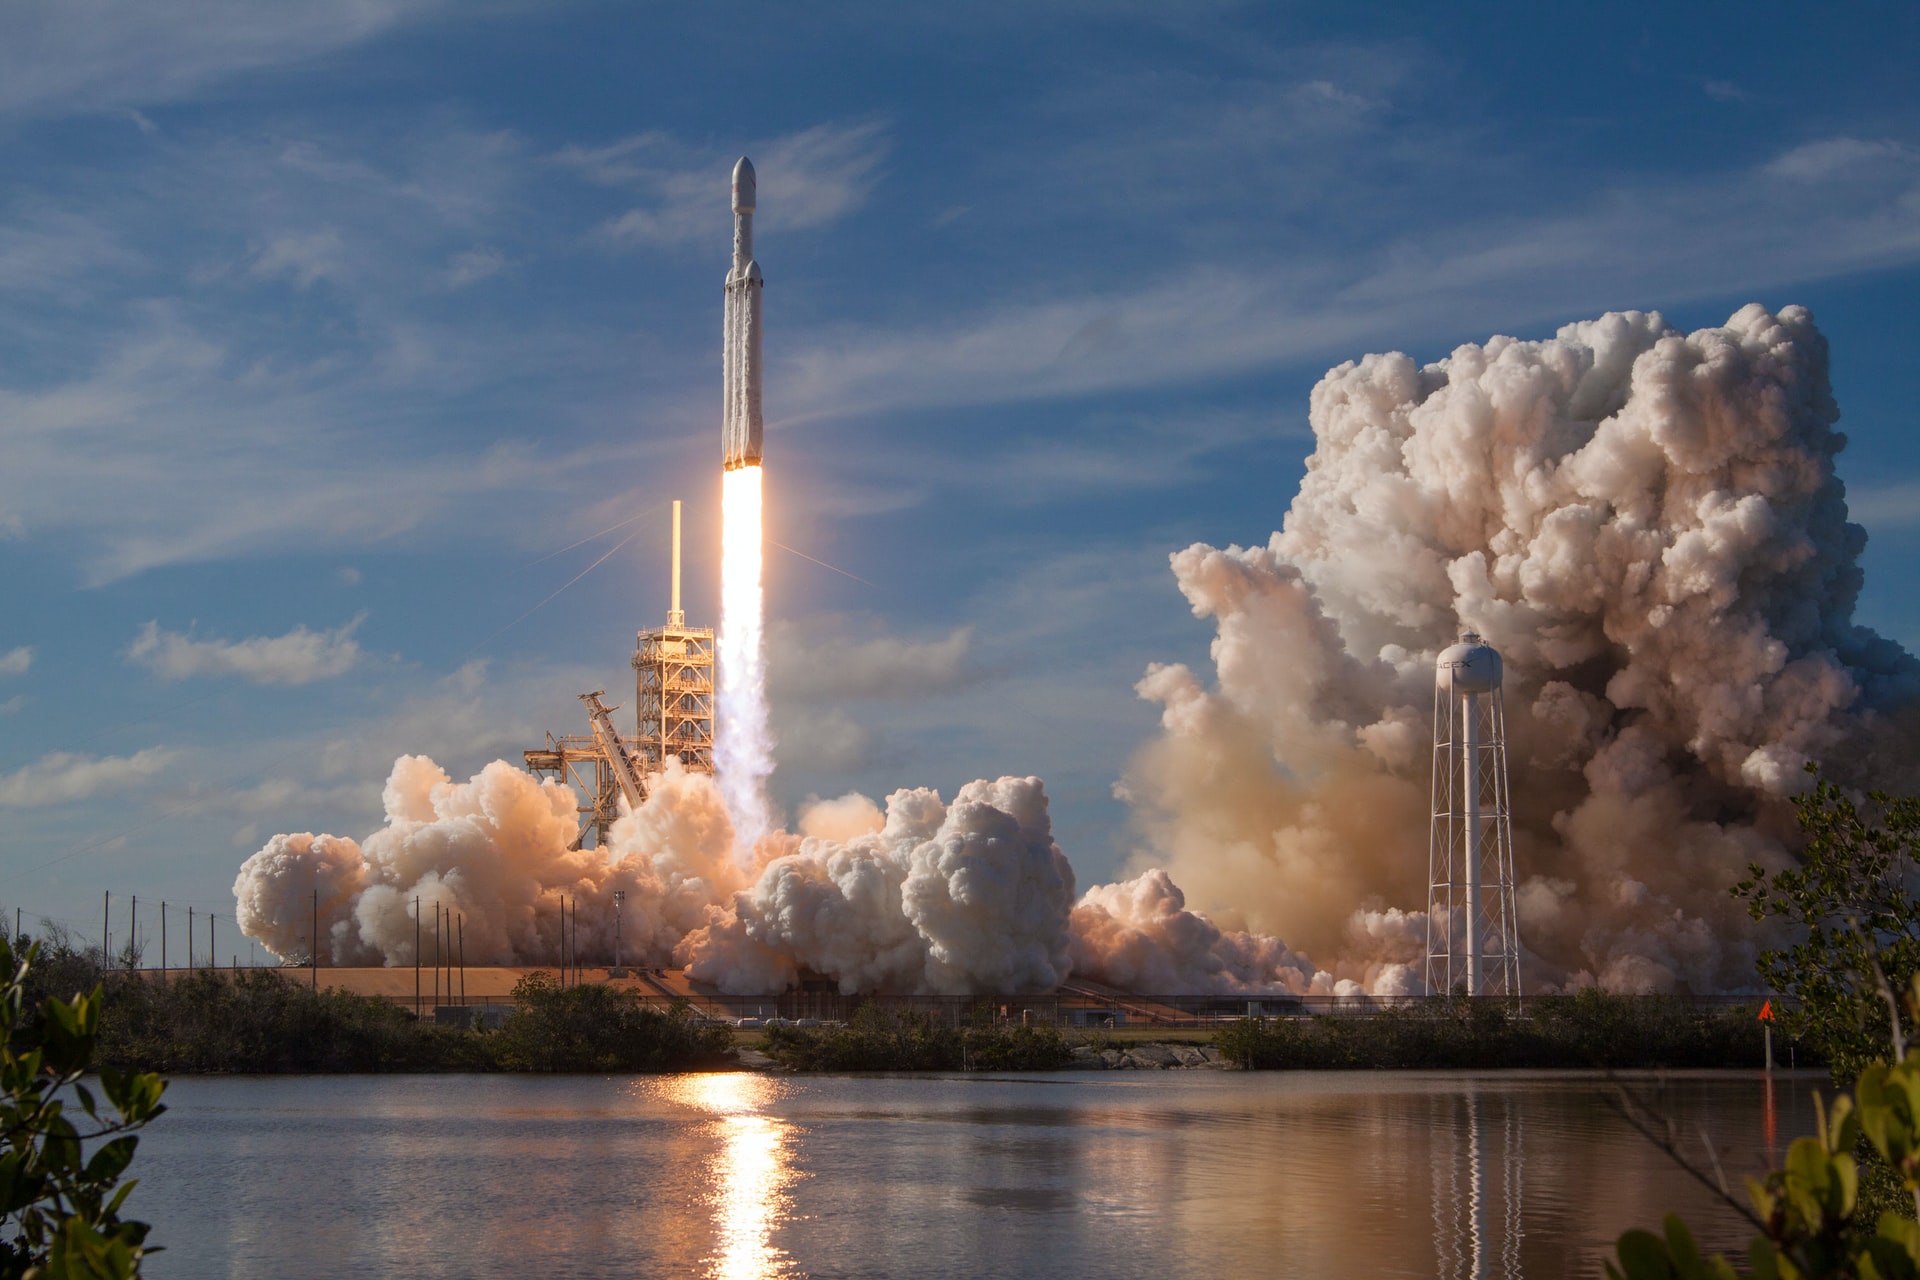 Launching like a professional. Photo by @spacex on Unsplash.